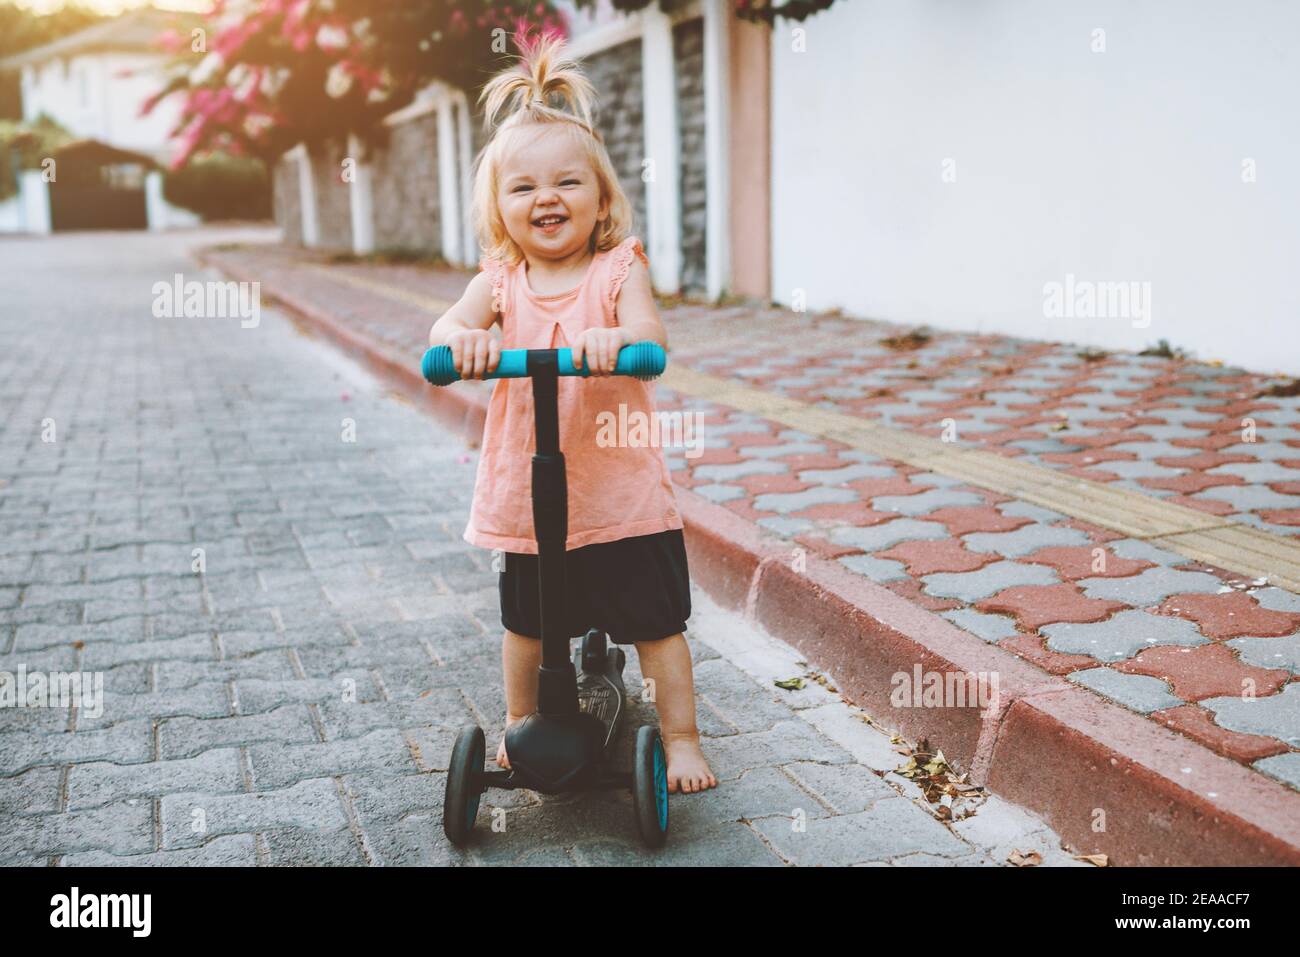 Child girl riding scooter on city street happy baby 1 year old healthy active lifestyle family fun outdoor Stock Photo